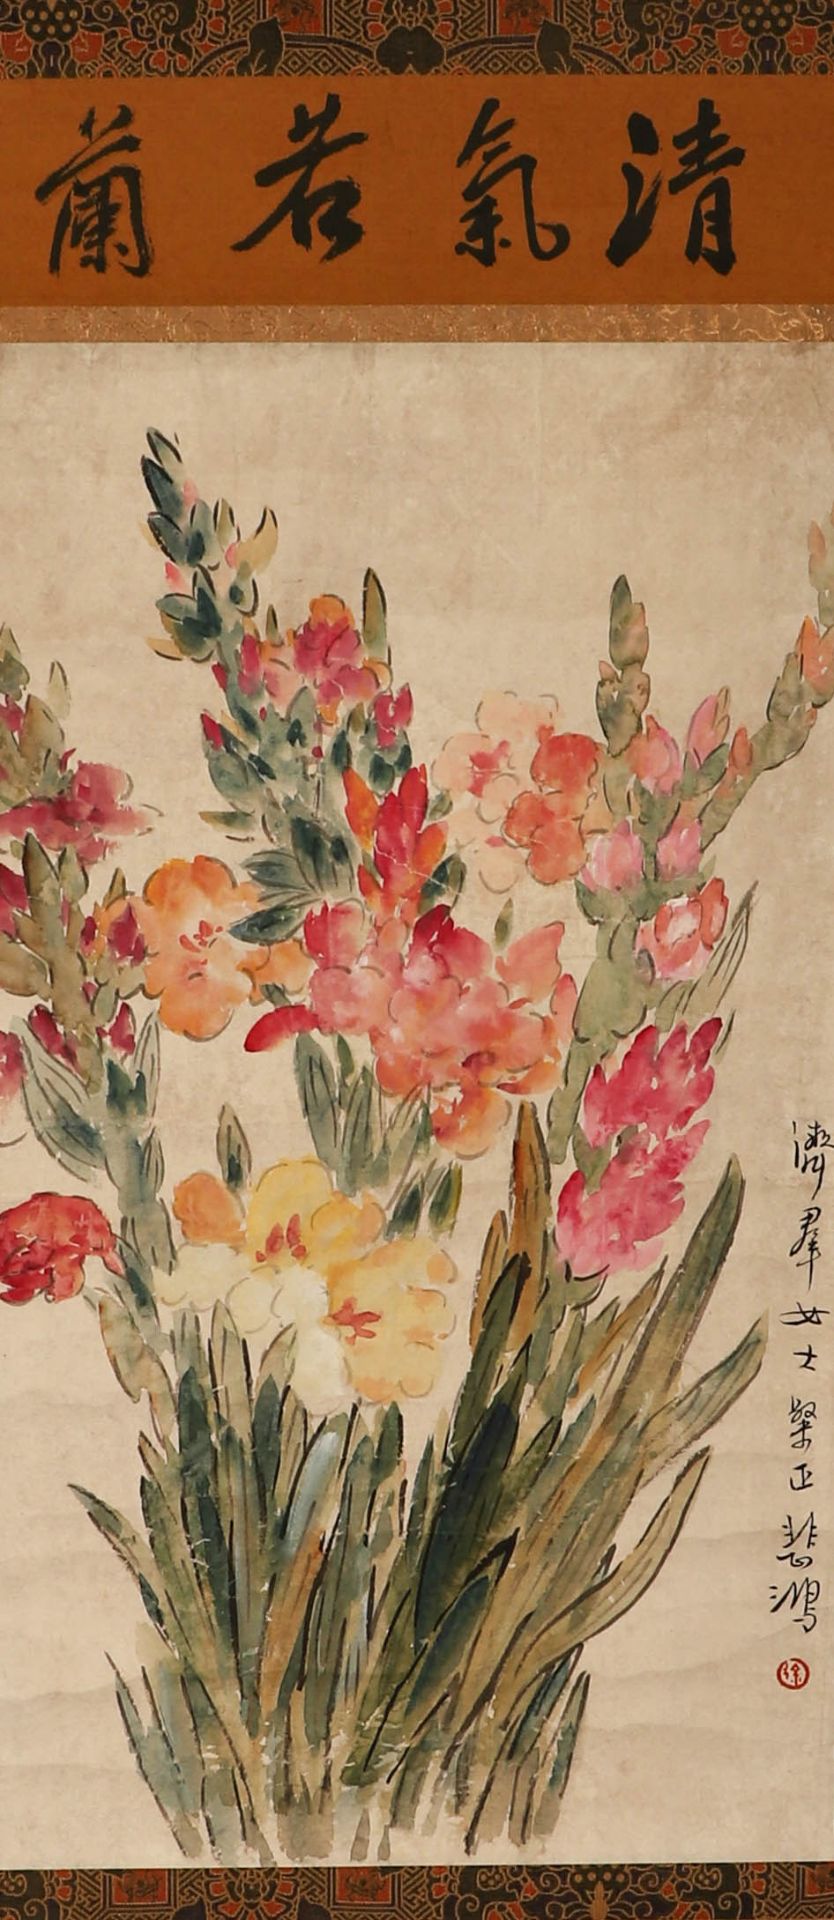 Flowers painting on paper by Xu Beihong  - Image 20 of 22